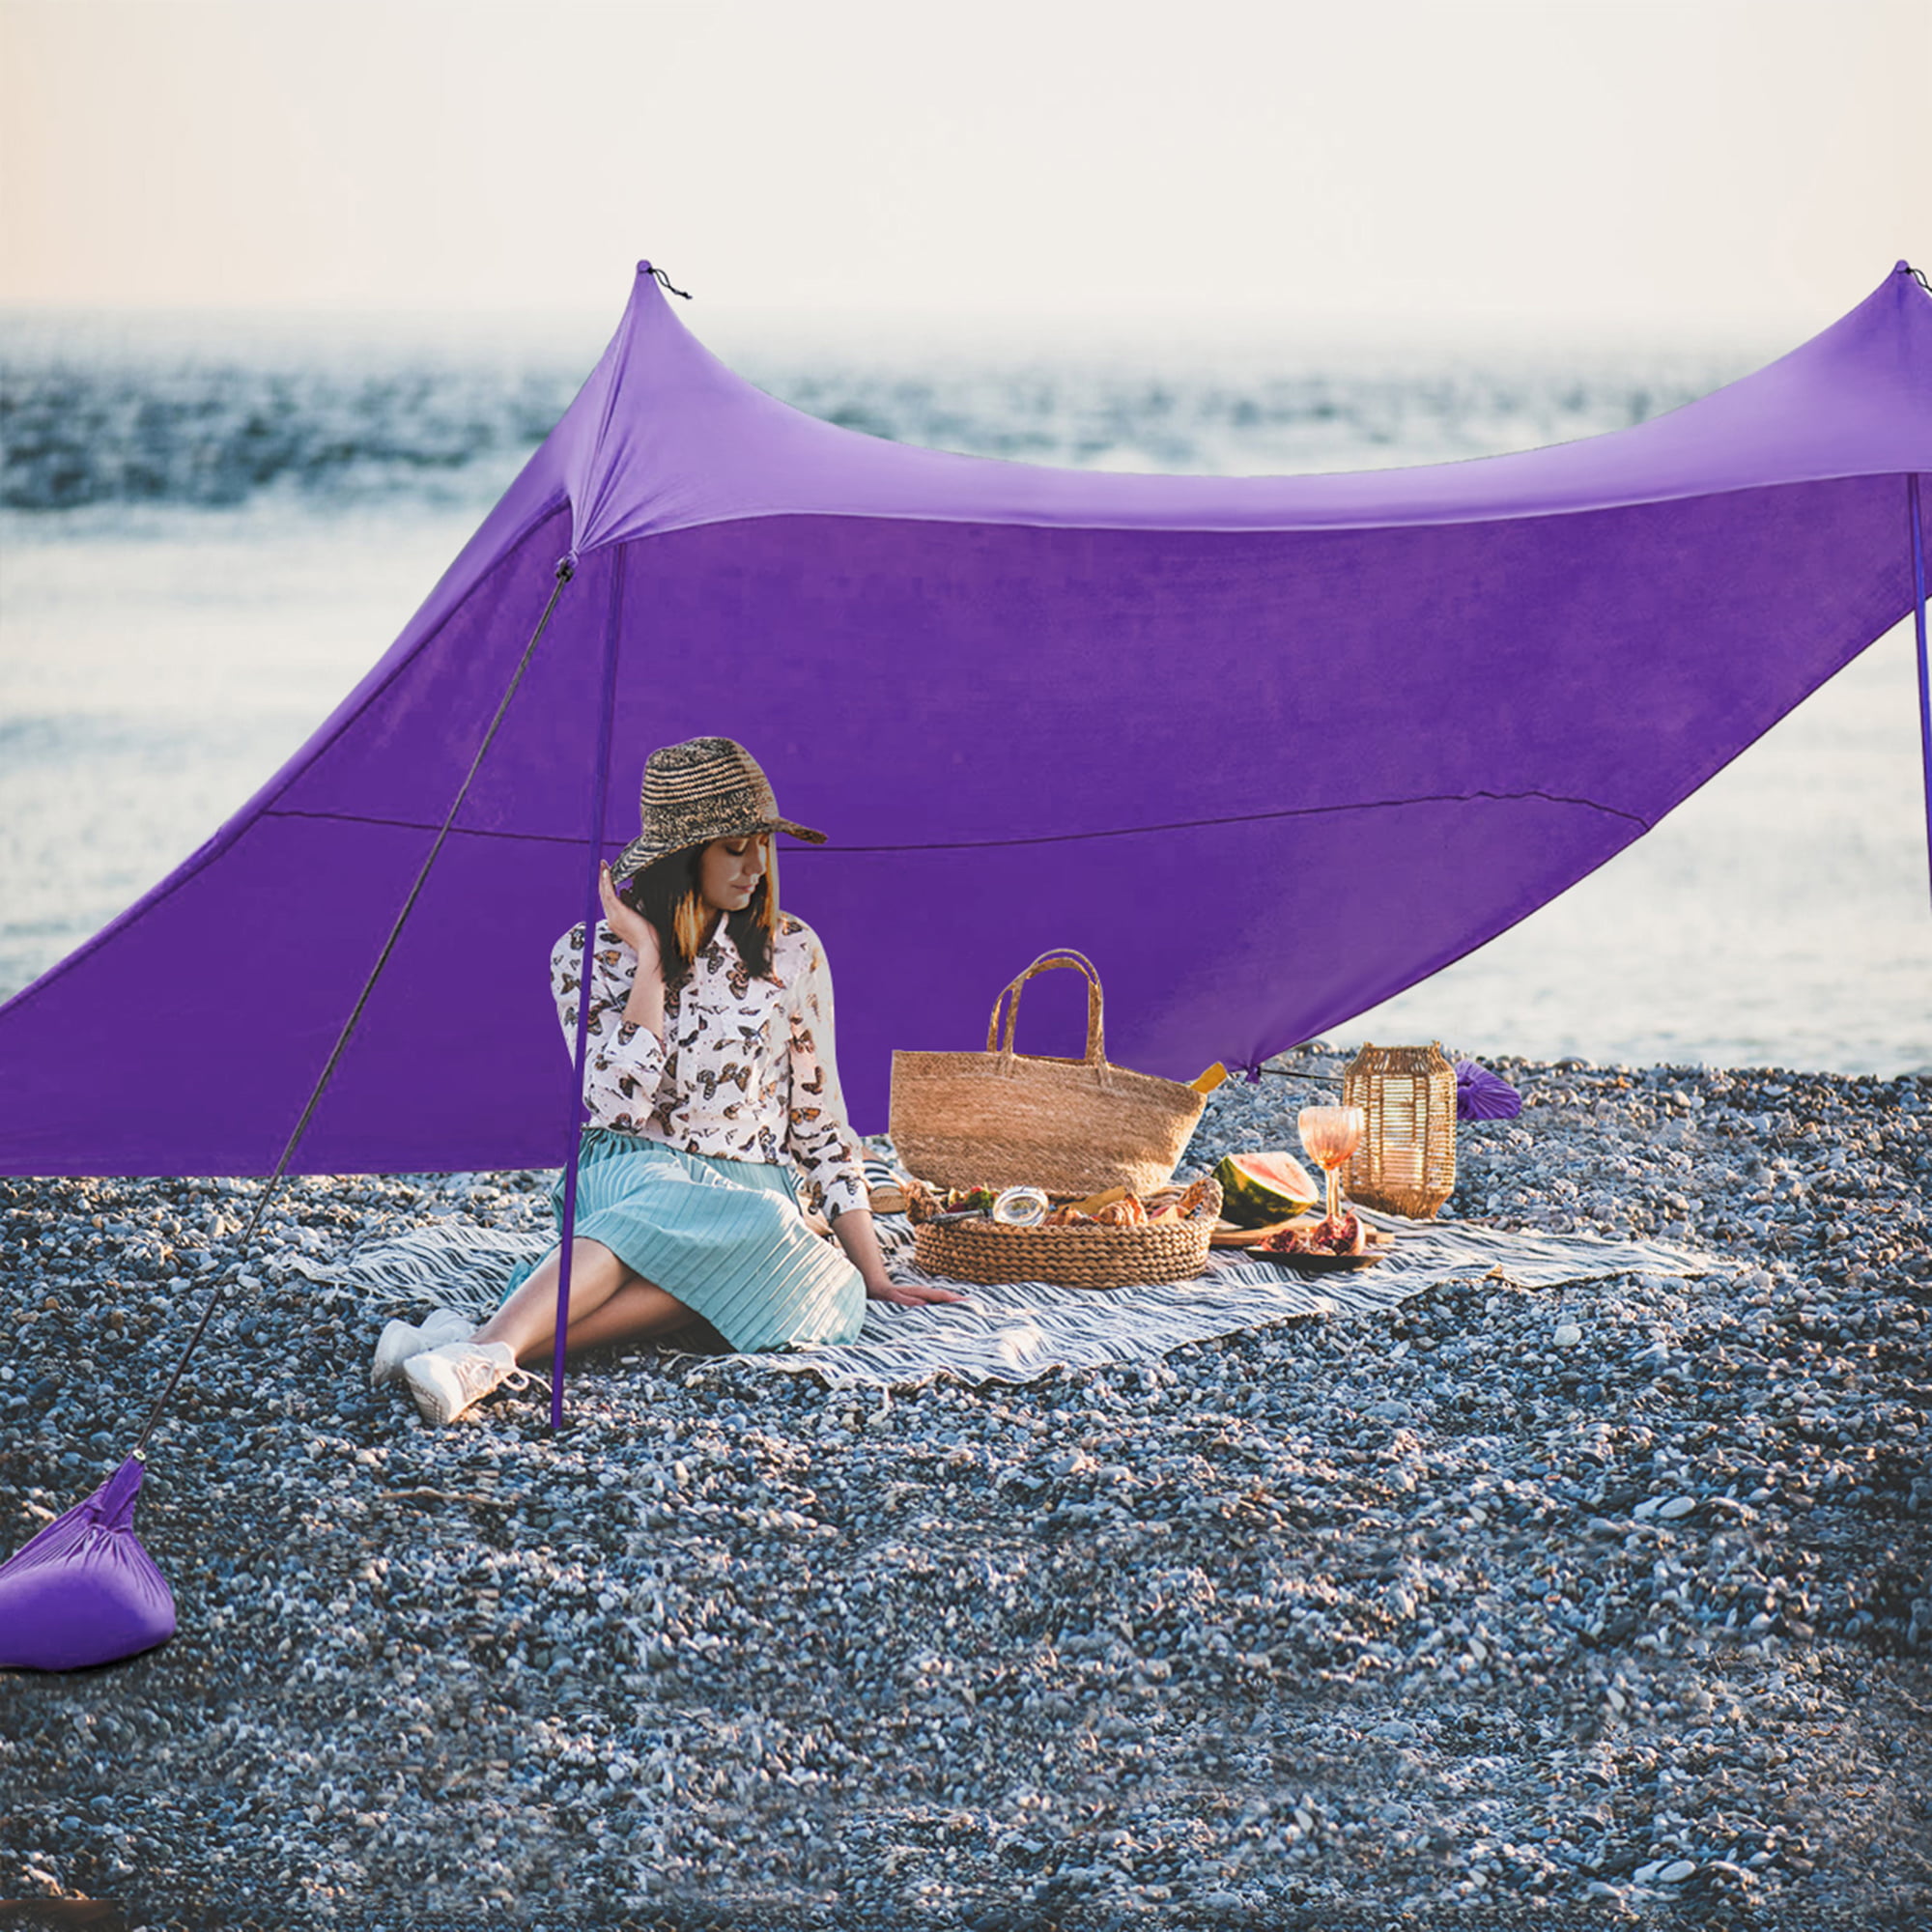 Gymax 10x9 FT Portable Beach Canopy Tent Shelter w/ Sand Anchor Carry Bag Purple